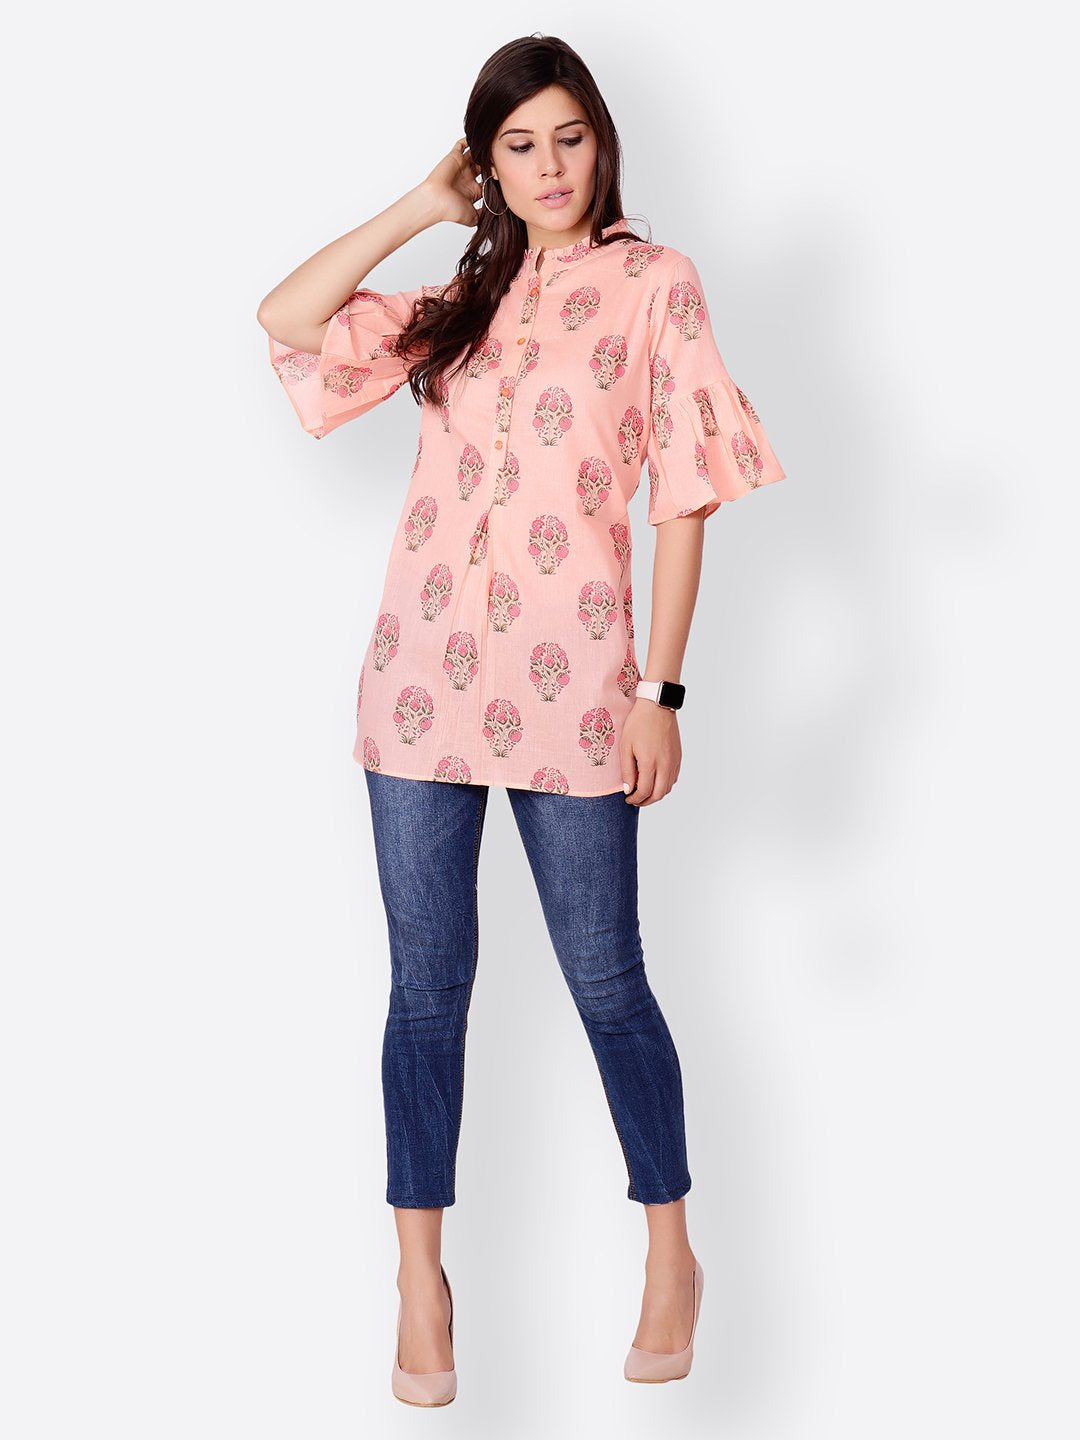 Cation Coral Printed Tunic